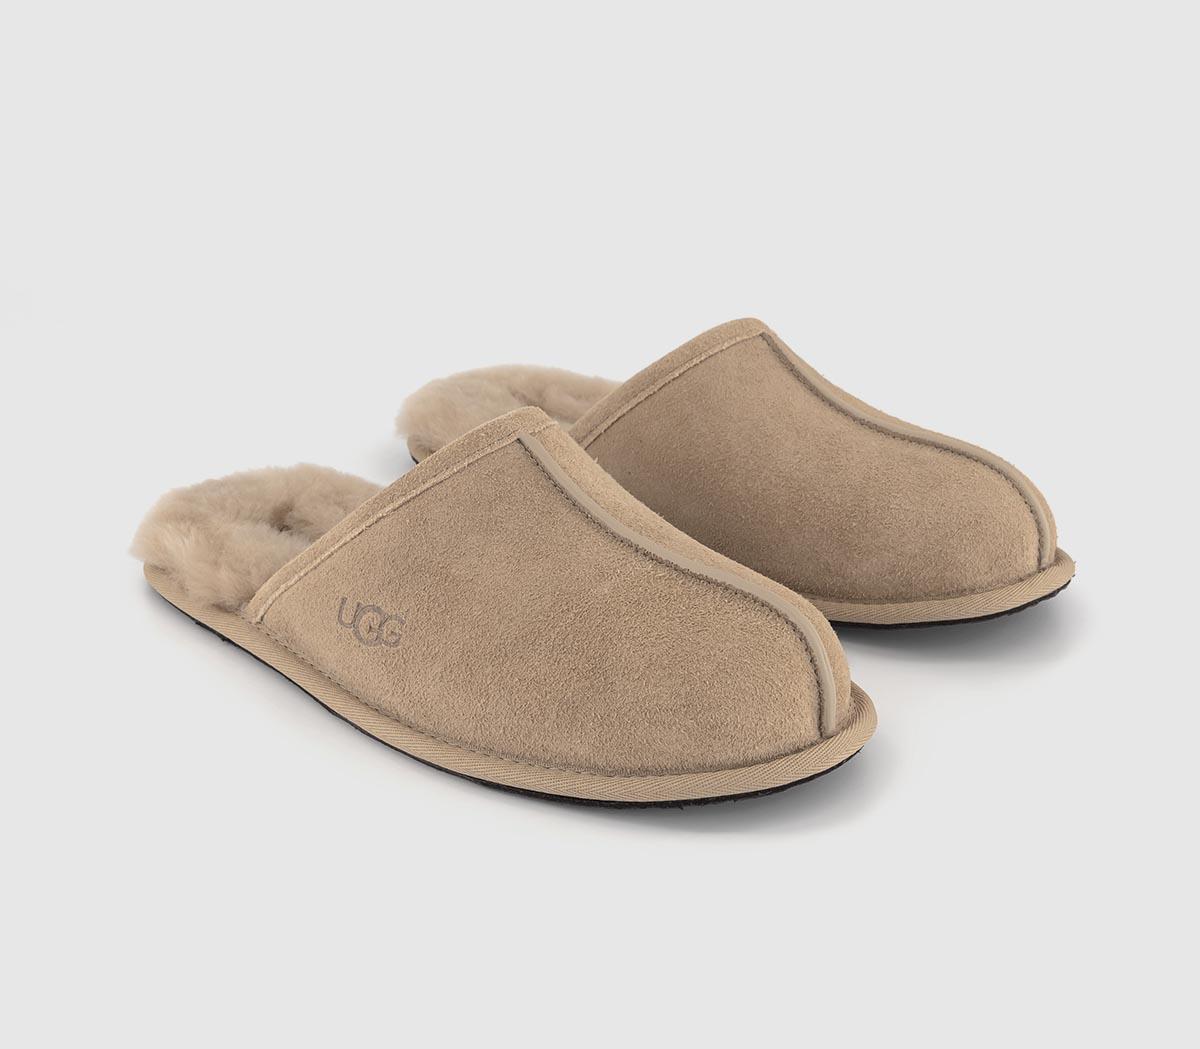 UGG Mens Scuff Slippers Sand, 8